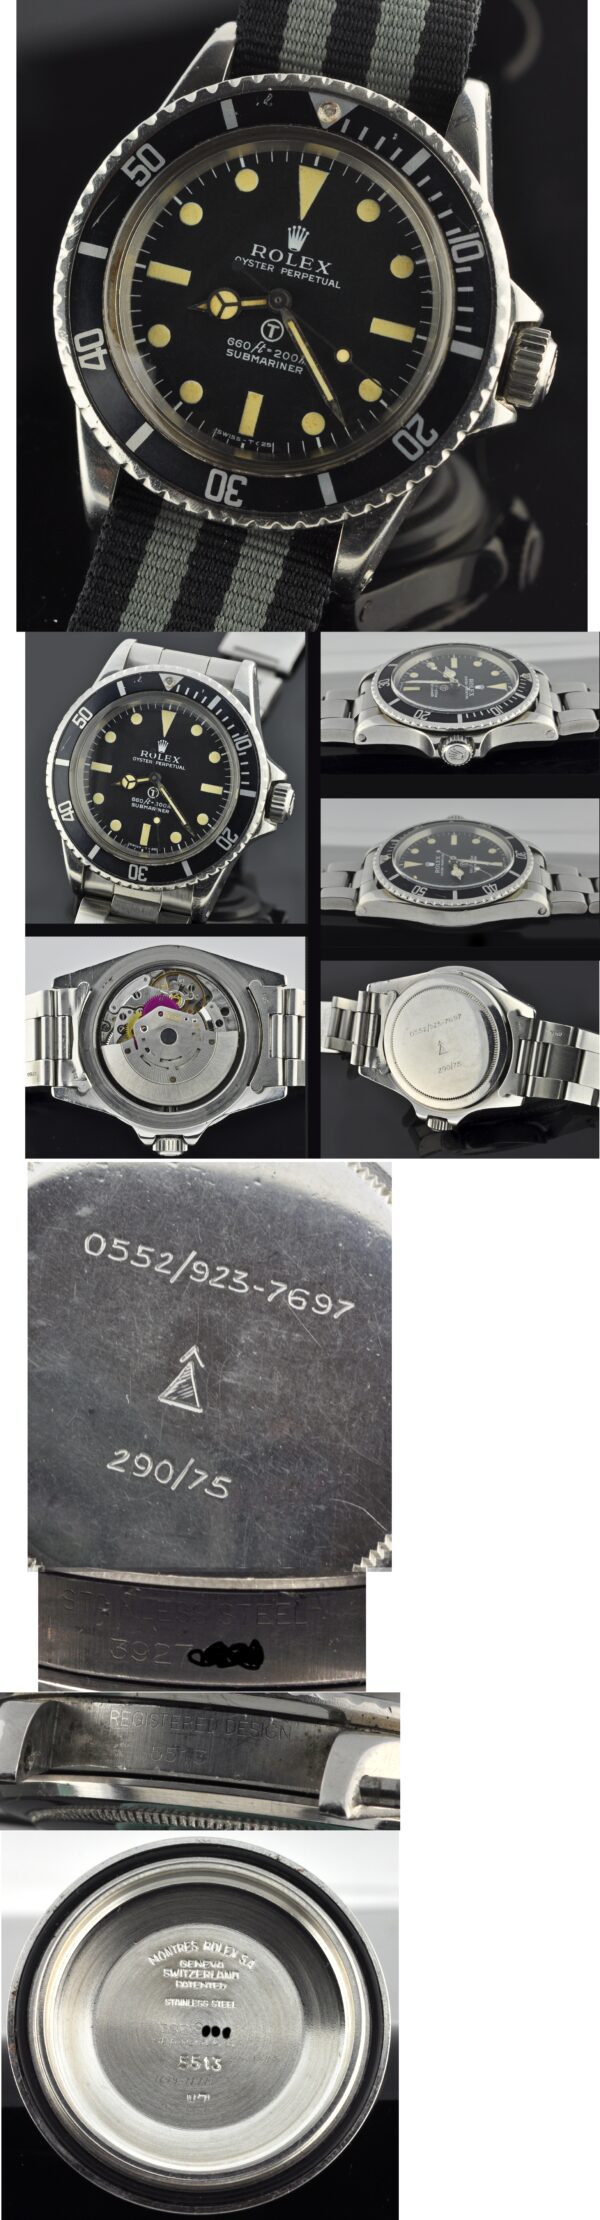 1973 Rolex Oyster Perpetual Submariner Milsub stainless steel watch with original case, T dial, markings, hands, NATO strap, and fixed lugs.